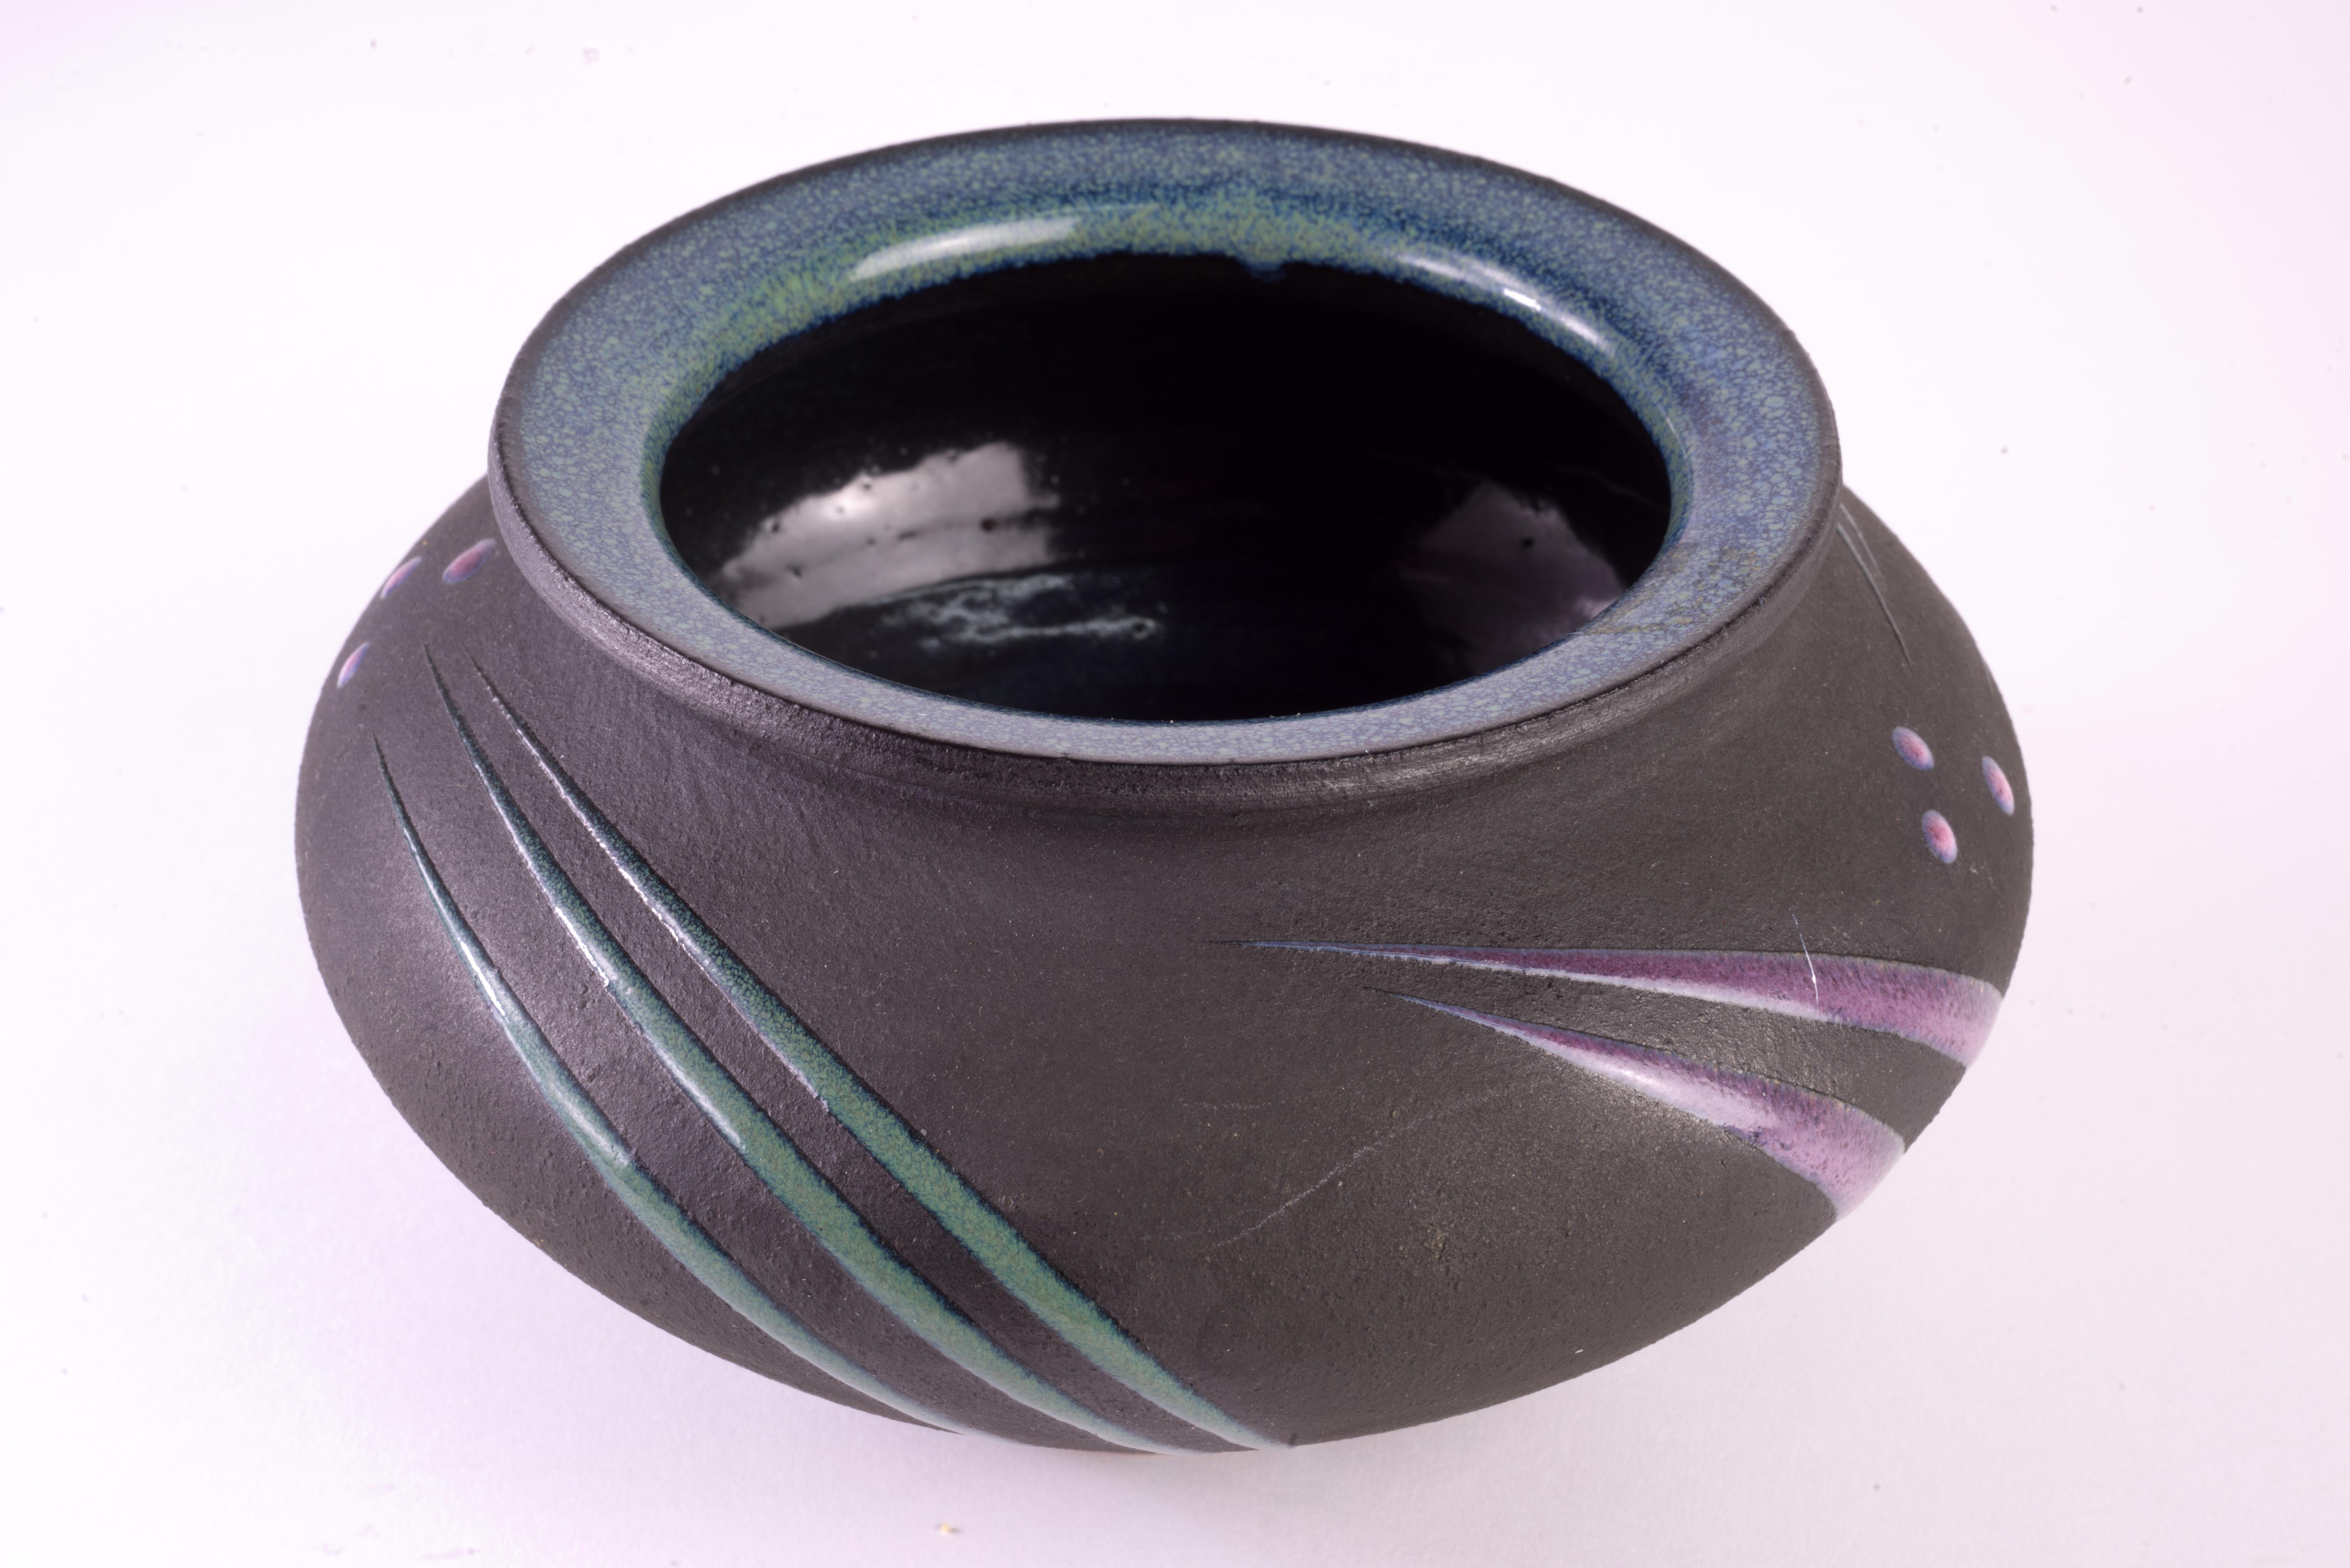 ostmodern bulbous ceramic vase was hand thrown and hand decorated by Michael Cho with black matte finish and raised pink and green abstract geometric decorations done in glossy glaze. The rim and interior are also glazed in glossy mottled green